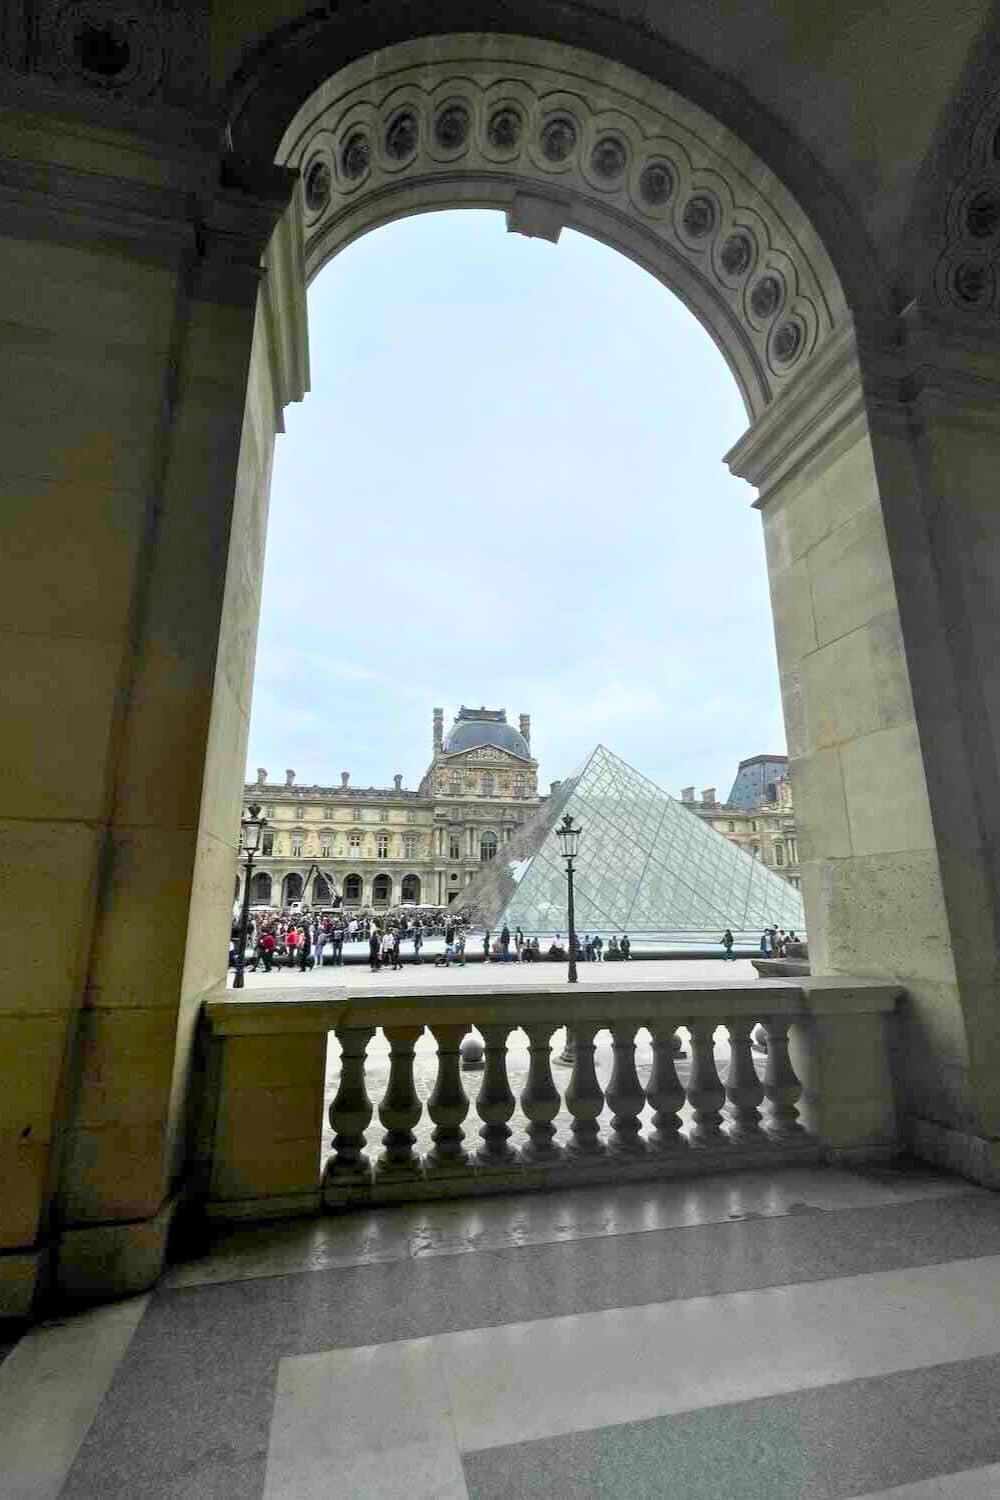 view from inside the Louvre Museum, looking out through an arched doorway towards the iconic glass pyramid and the museum's facade.